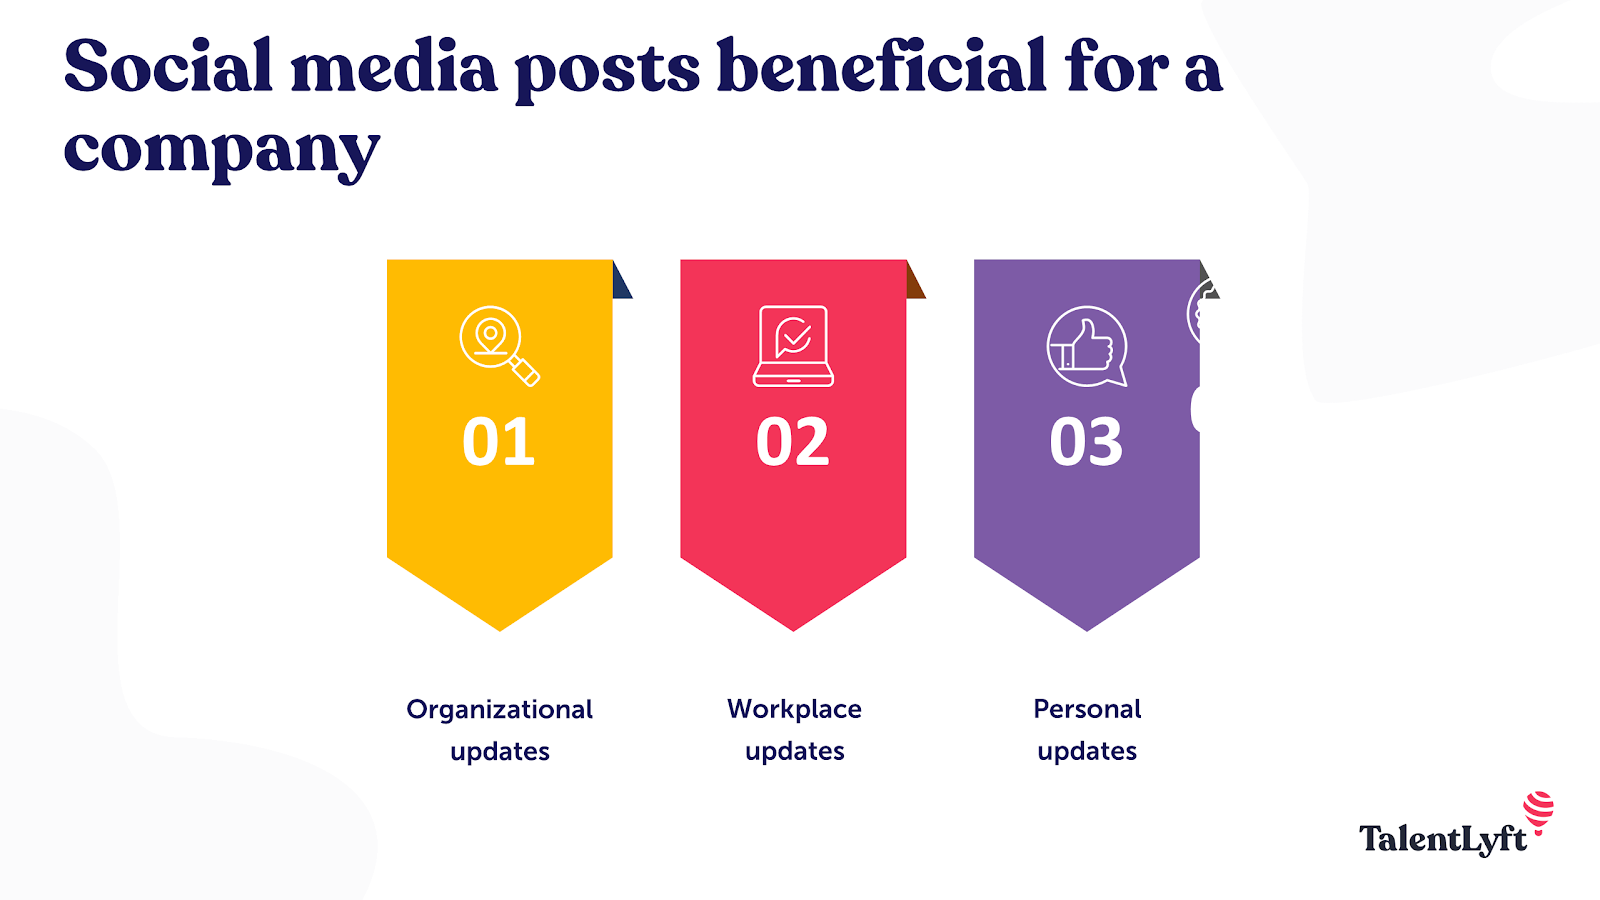 Social media posts by employees: What to post?